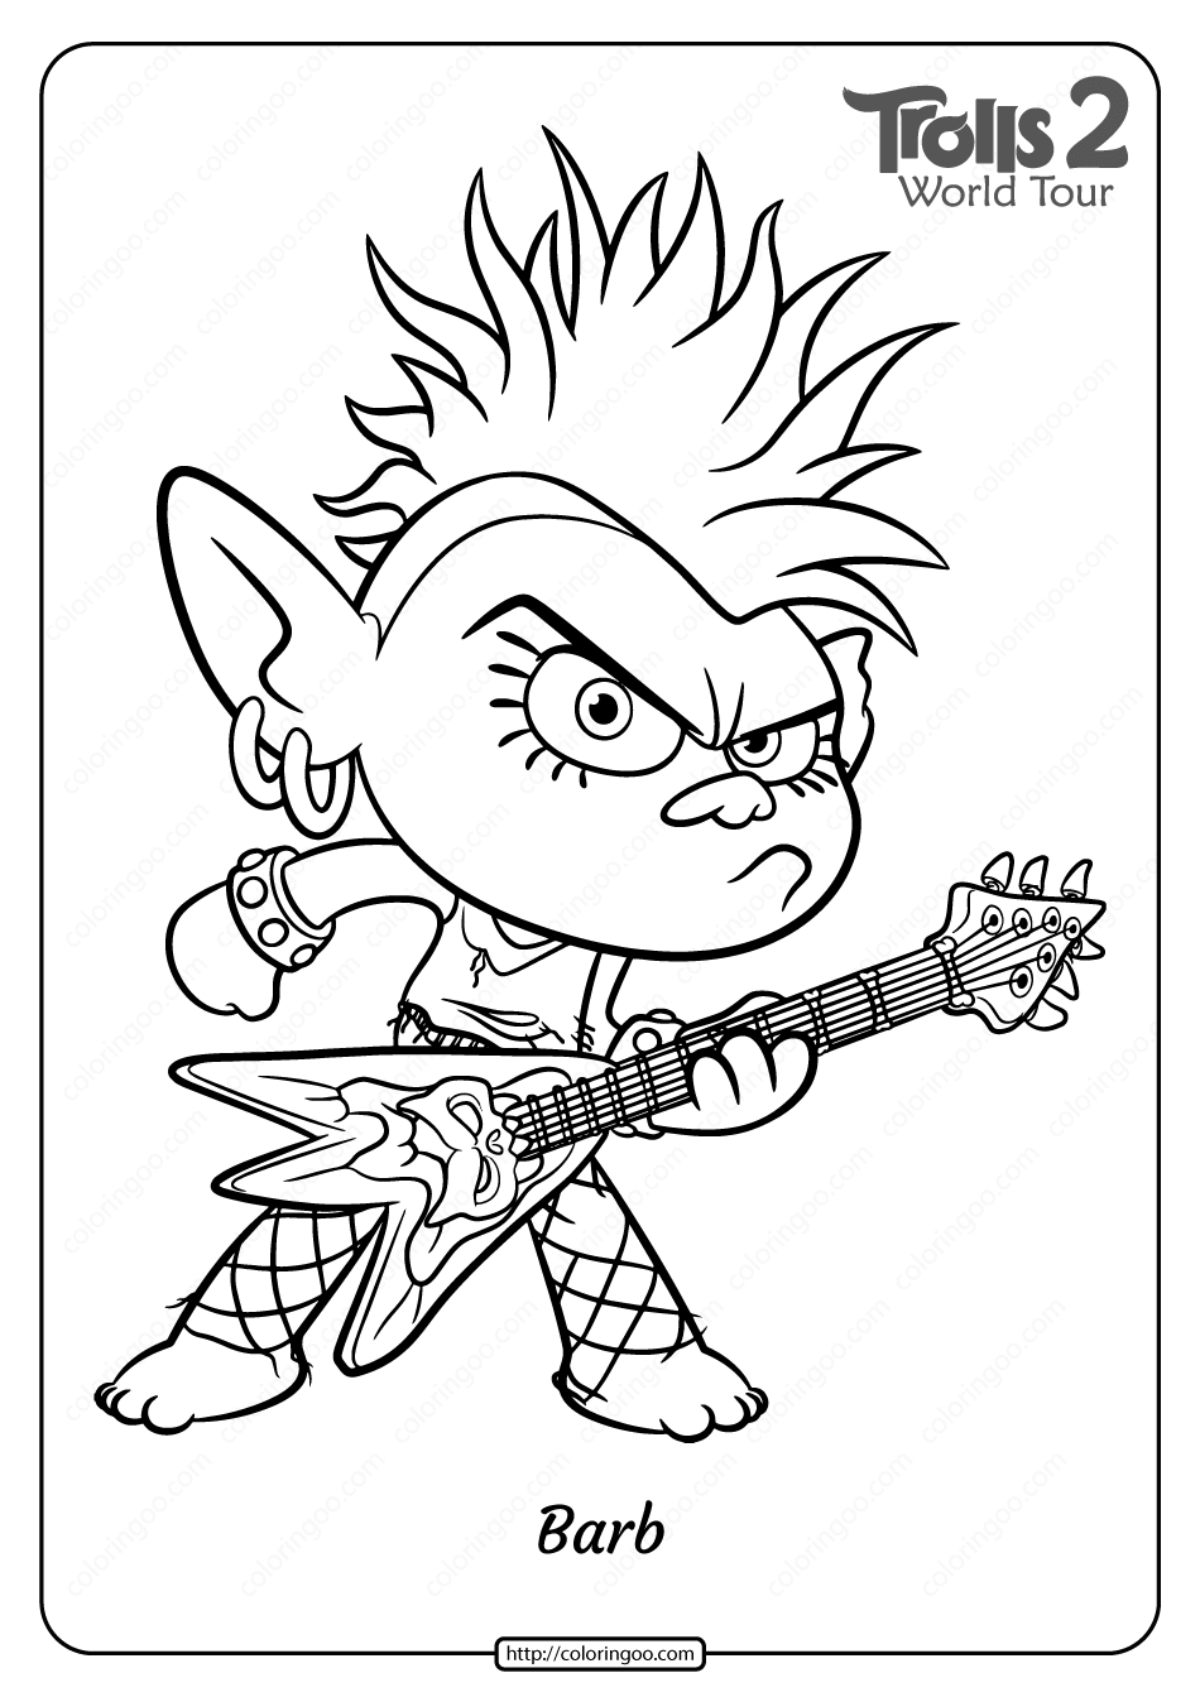 Free Printable Trolls 20 Queen Barb Pdf Coloring Page   Coloring Home